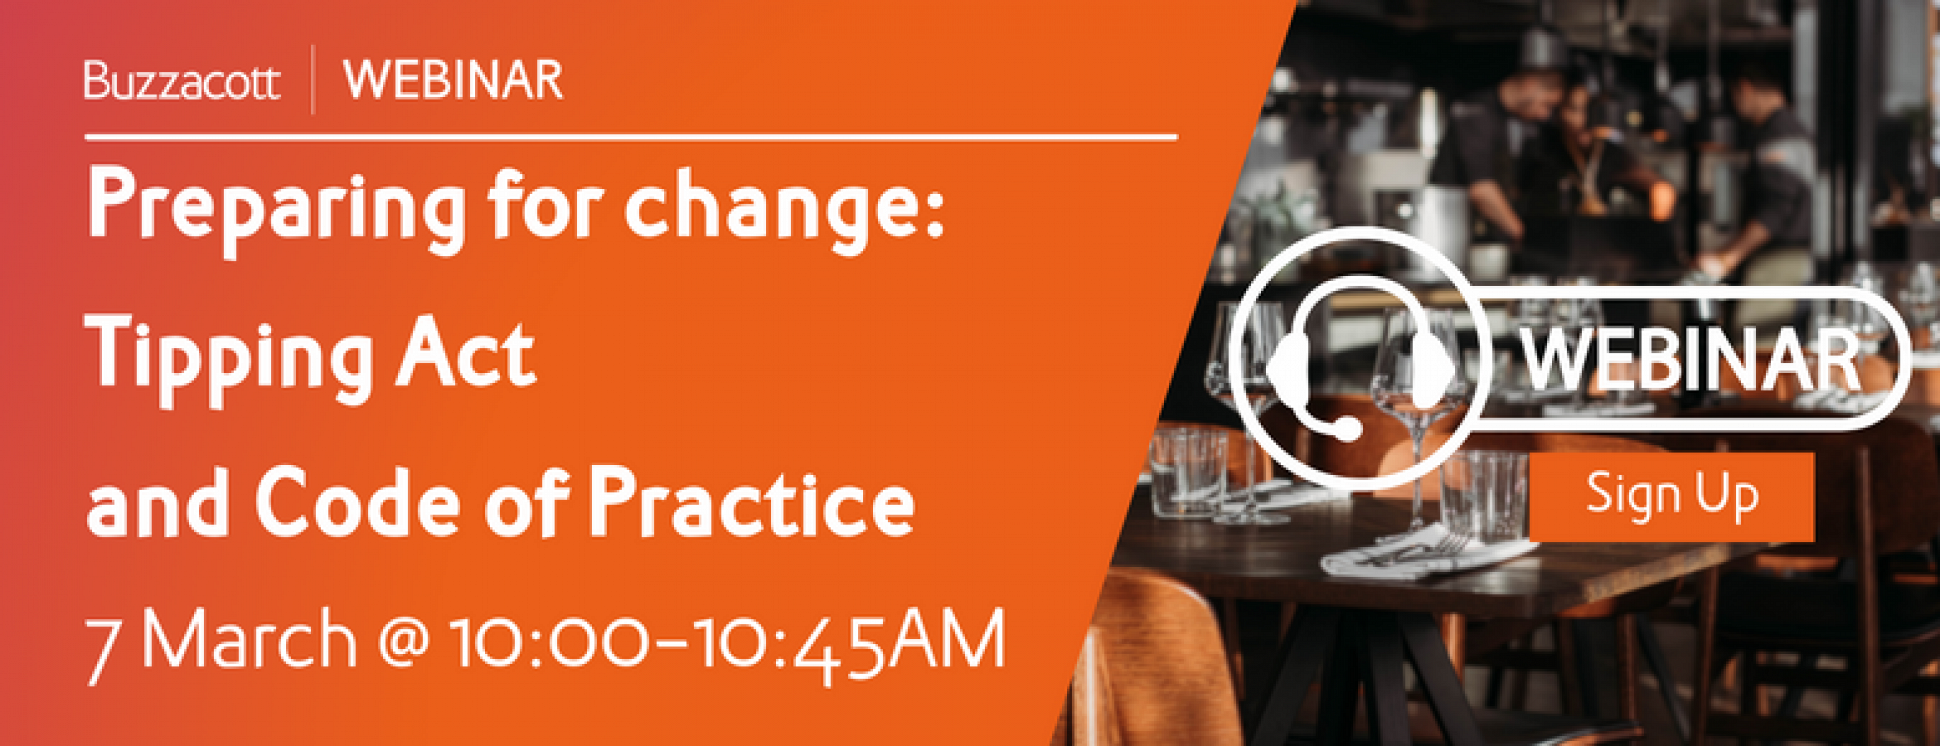 Preparing for change: Tipping Act and Code of Practice Webinar